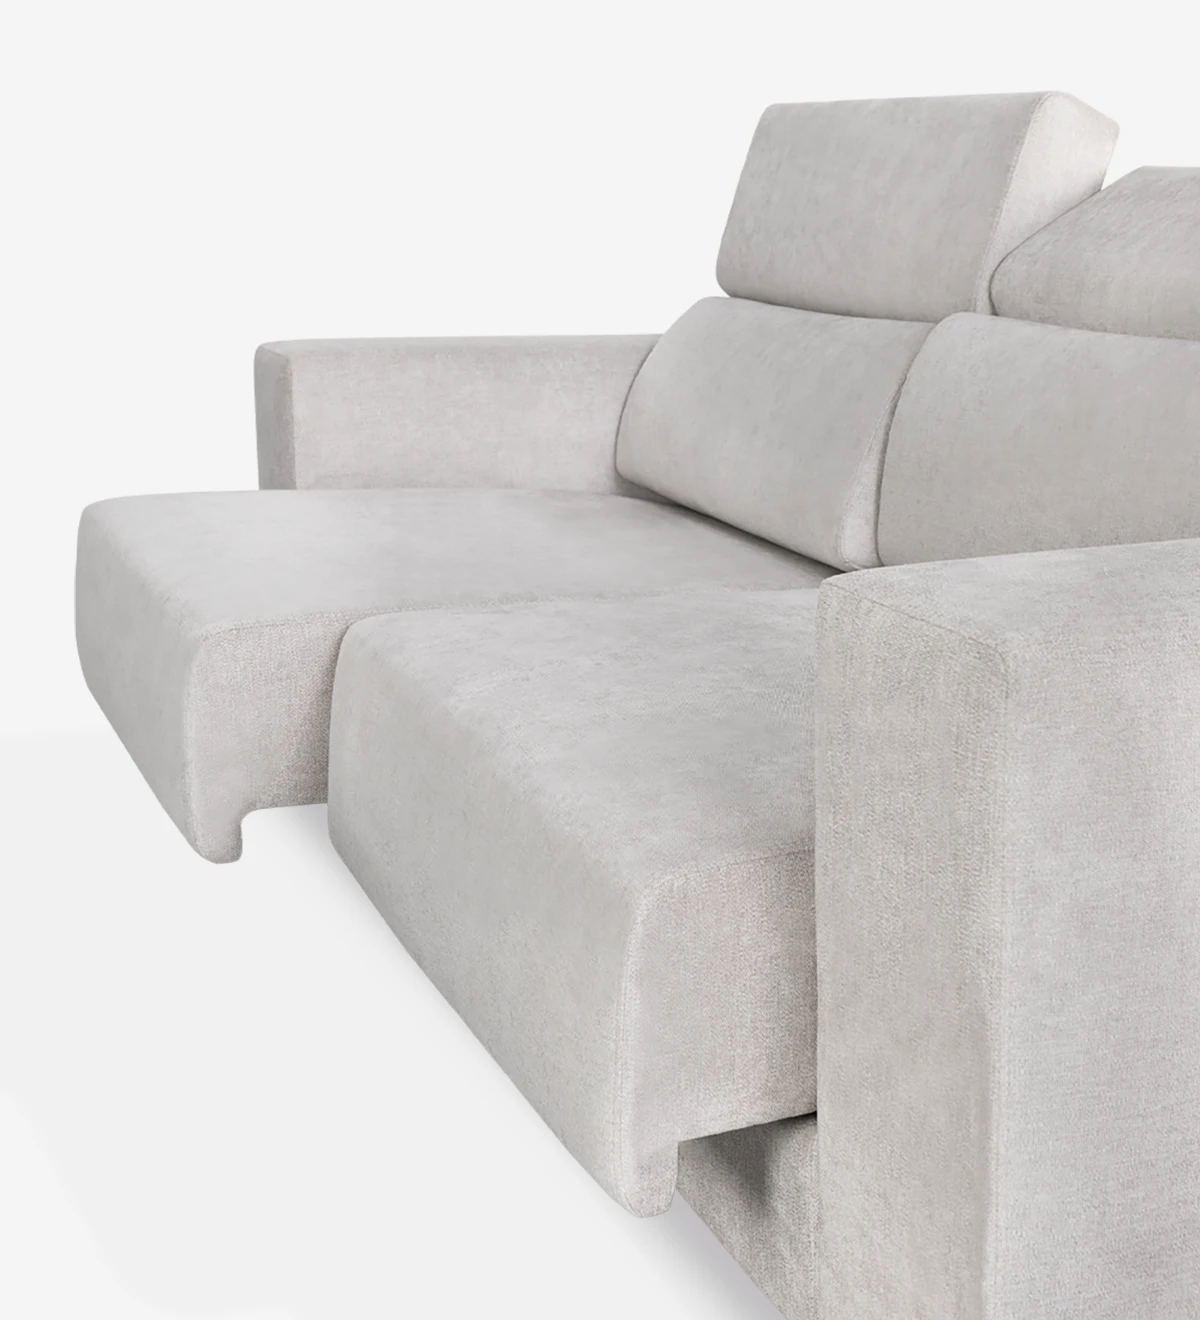 2 seater, upholstered in fabric, with reclining headrests and sliding seats.